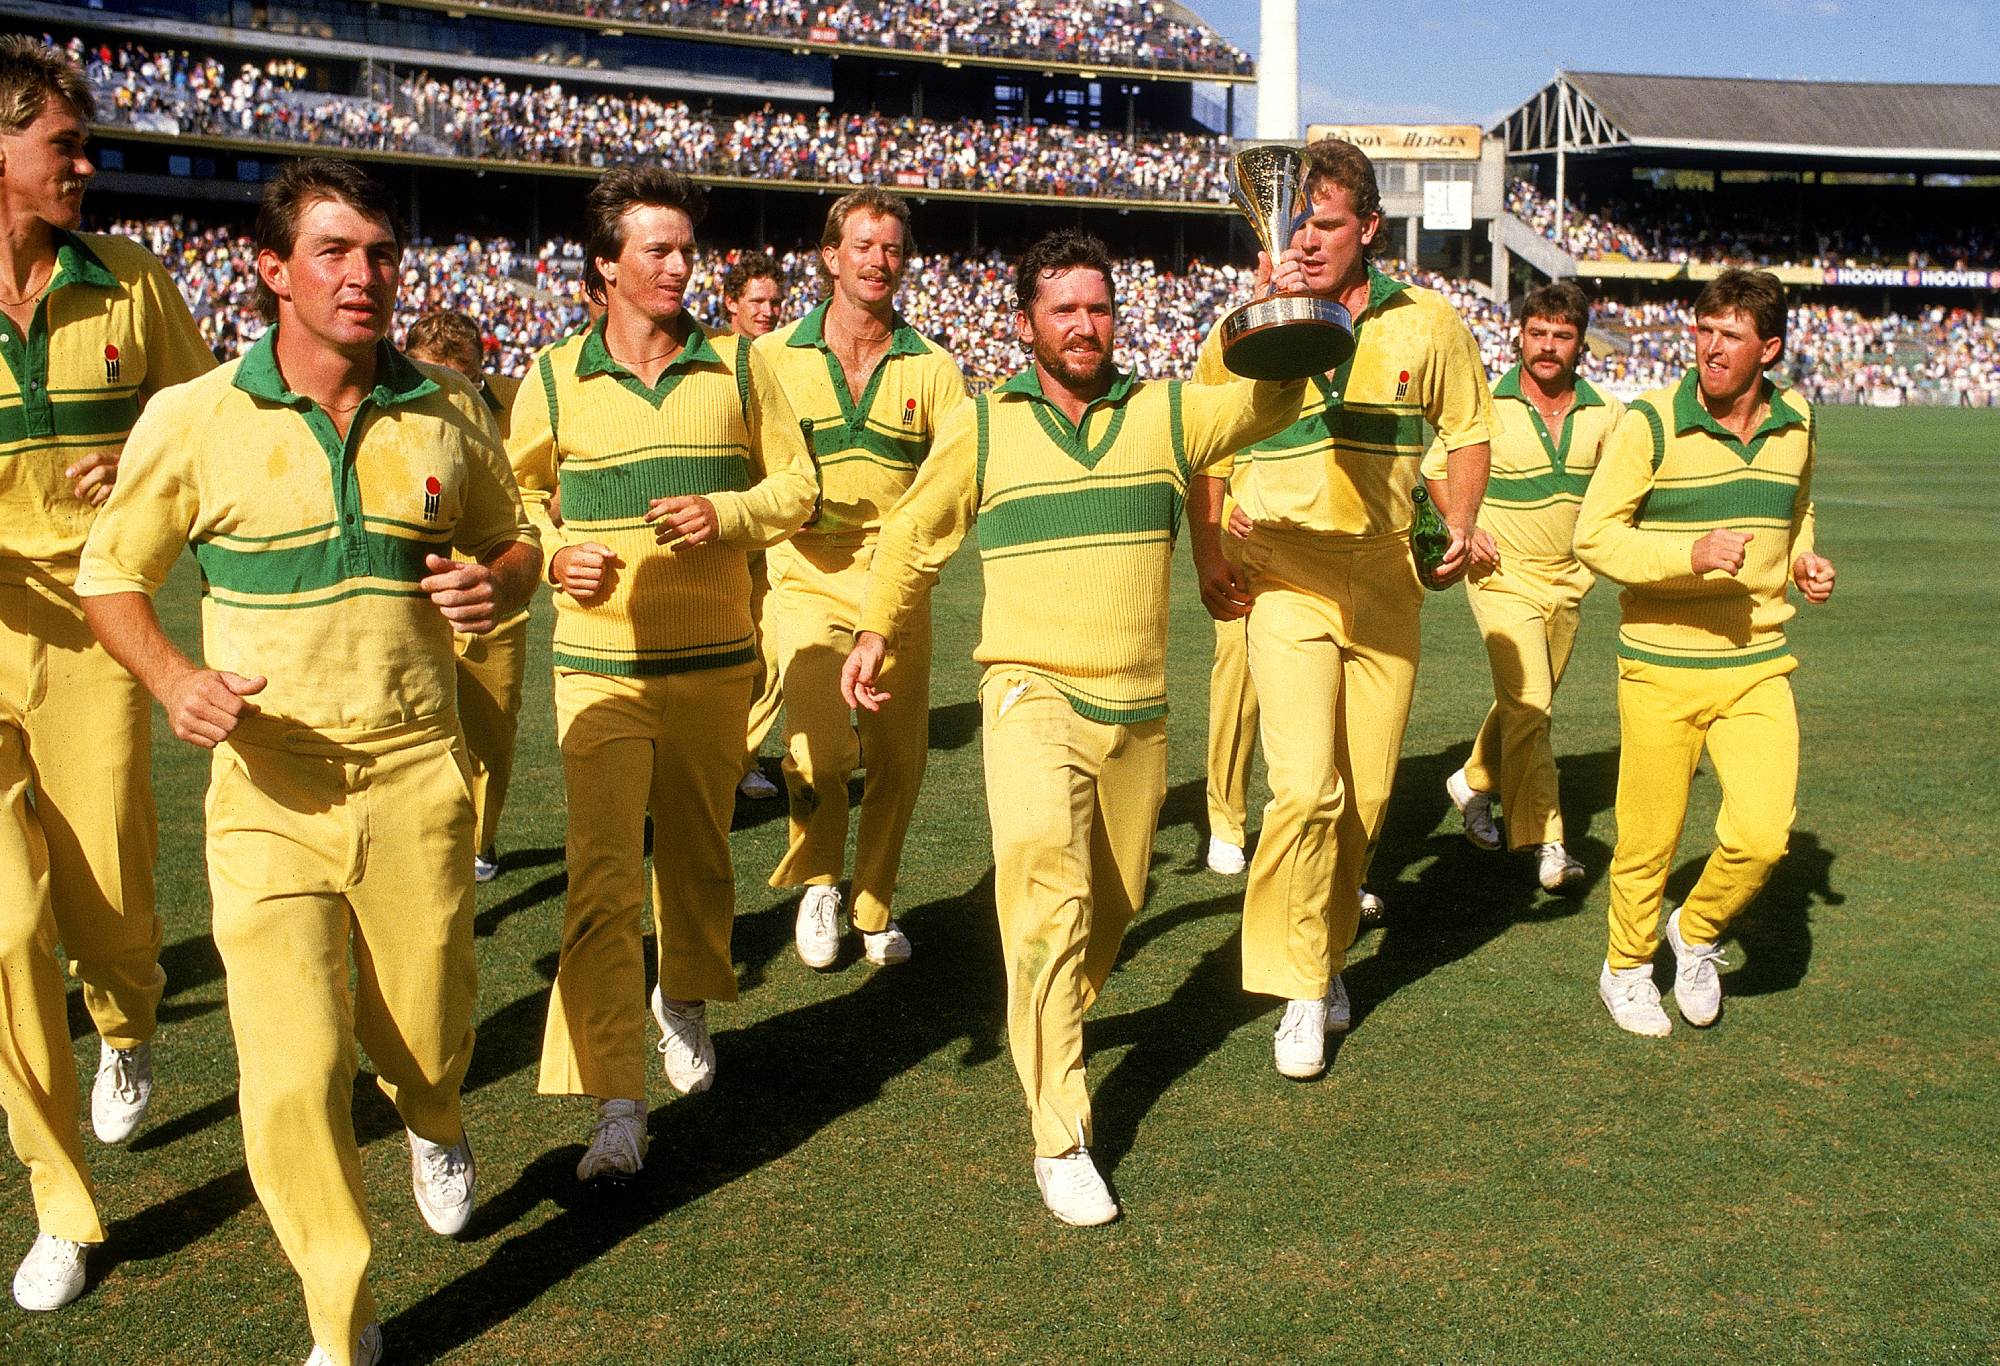 MELBOURNE, AUSTRALIA - FEBRUARY 9: Allan Border (C) of Australia holds aloft the world series cup after the Benson & Hedges World Series Cup 2nd final match between Australia and India at the Melbourne Cricket Ground February 9, 1986 in Melbourne, Australia. (Photo by Tony Feder/Getty Images)